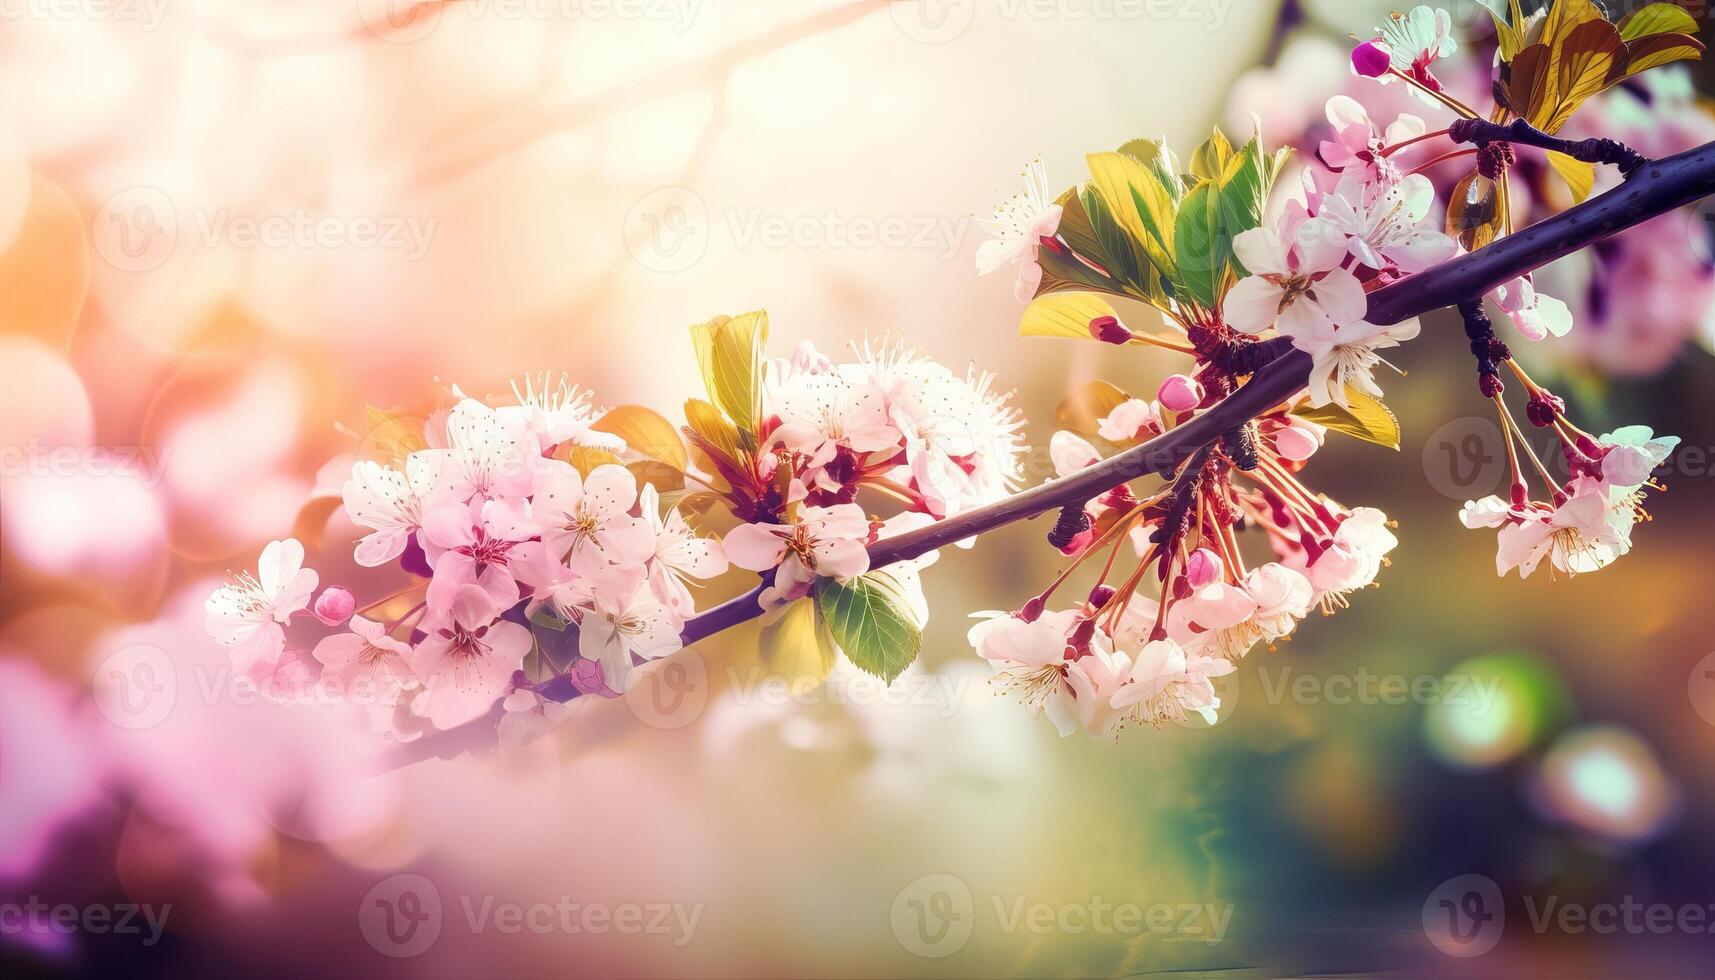 nature background with spring blooming flowers. photo